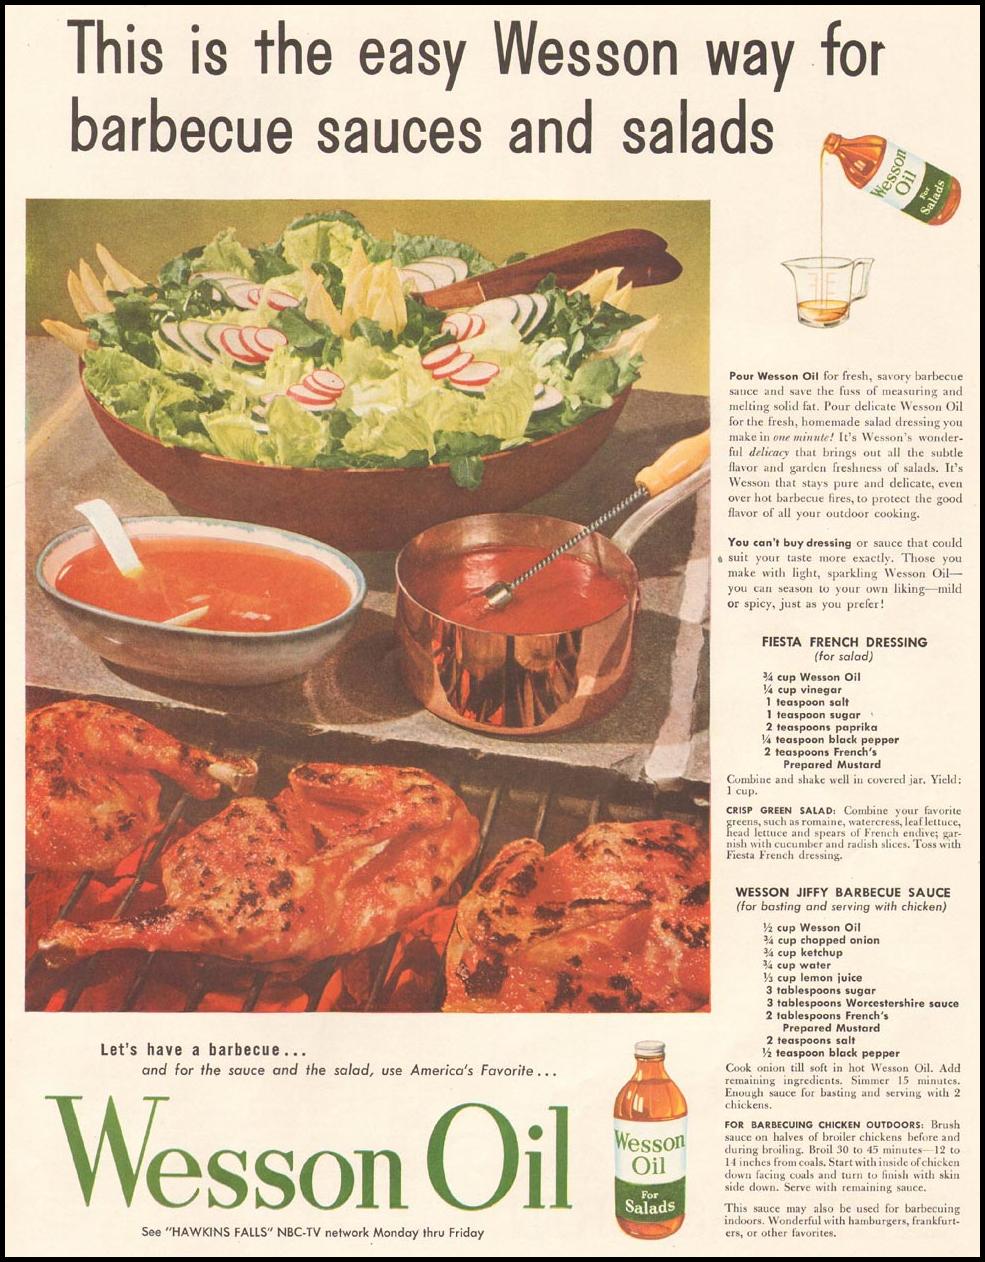 WESSON OIL
LADIES' HOME JOURNAL
07/01/1954
p. 71